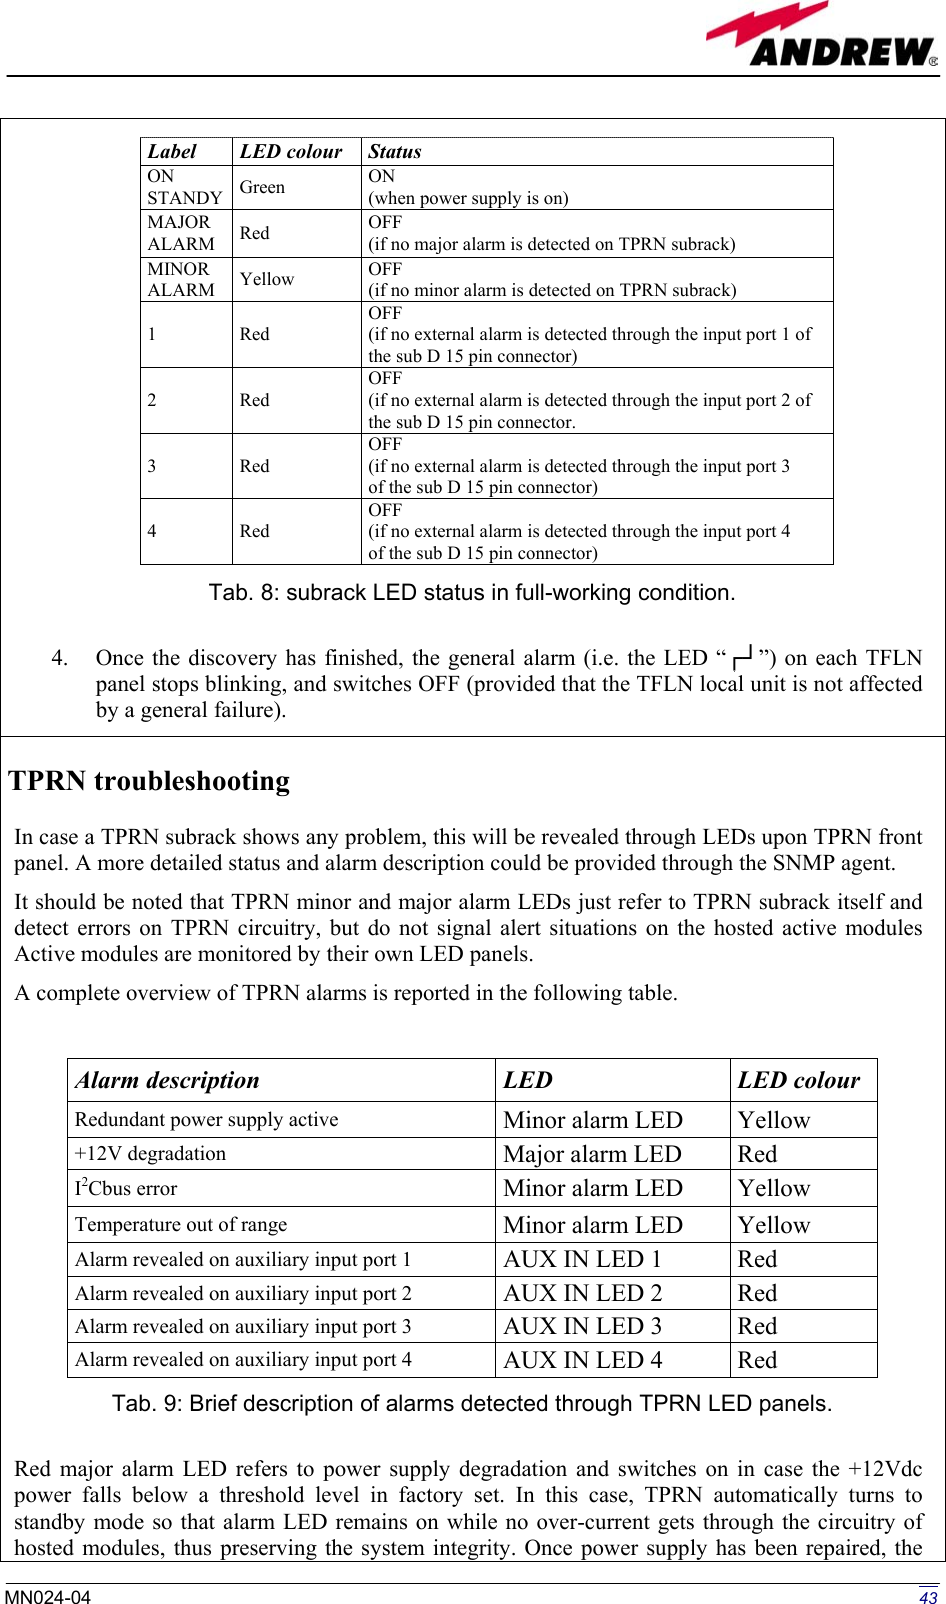 Page 18 of Andrew Wireless Innovations Group BCP-TFAM26 Model TFAM26 Downlink Booster User Manual 